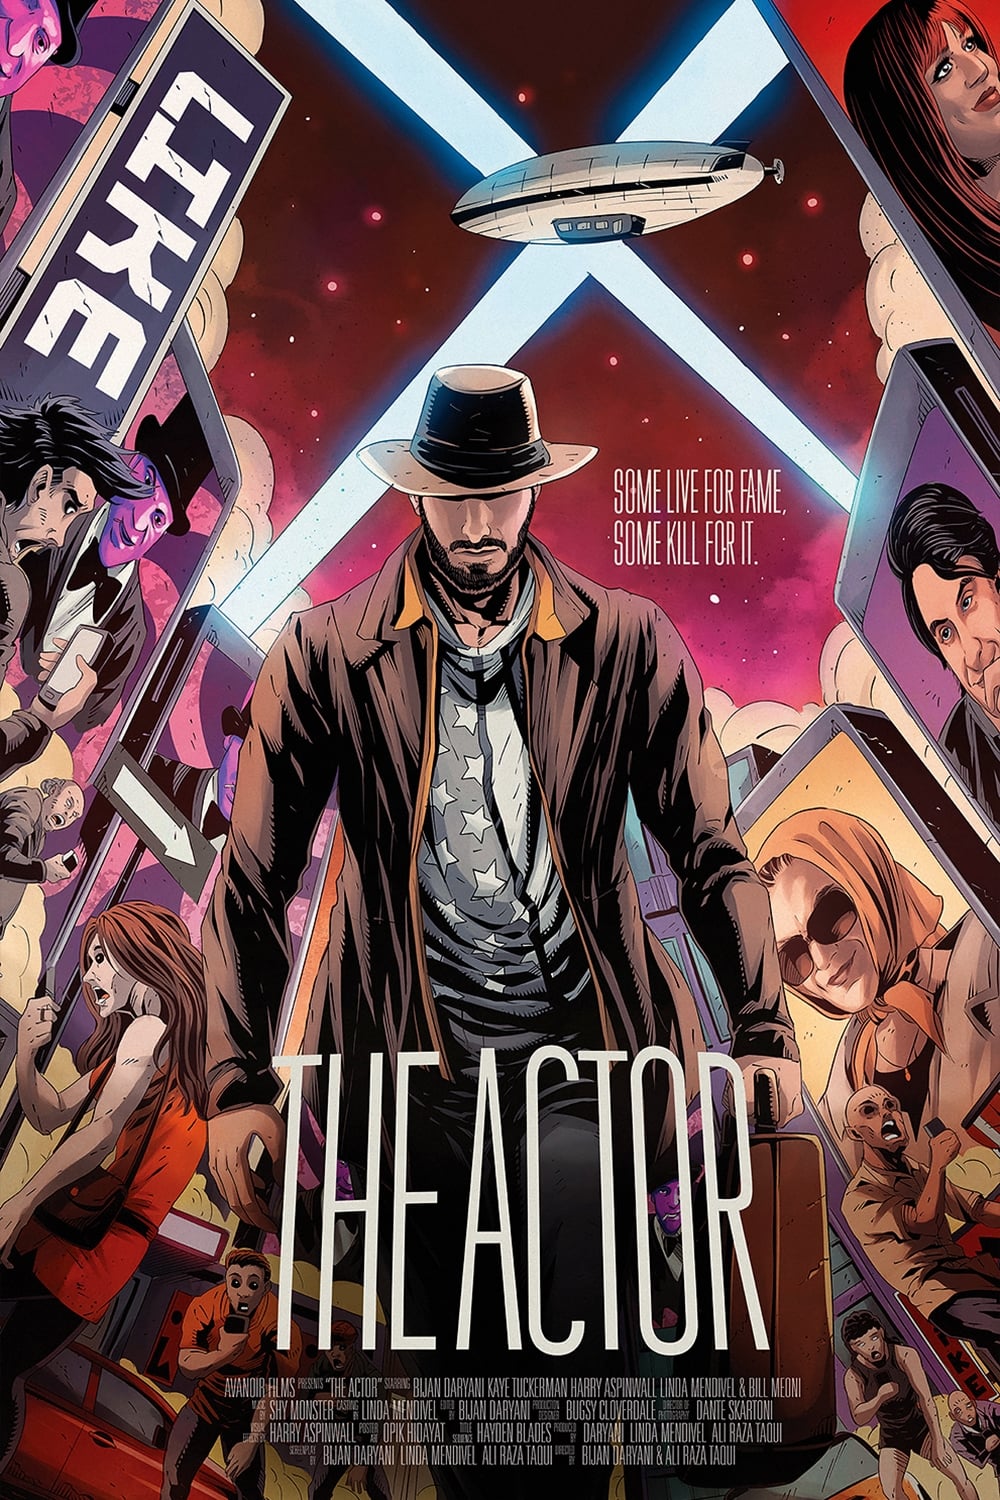 The Actor (2018)